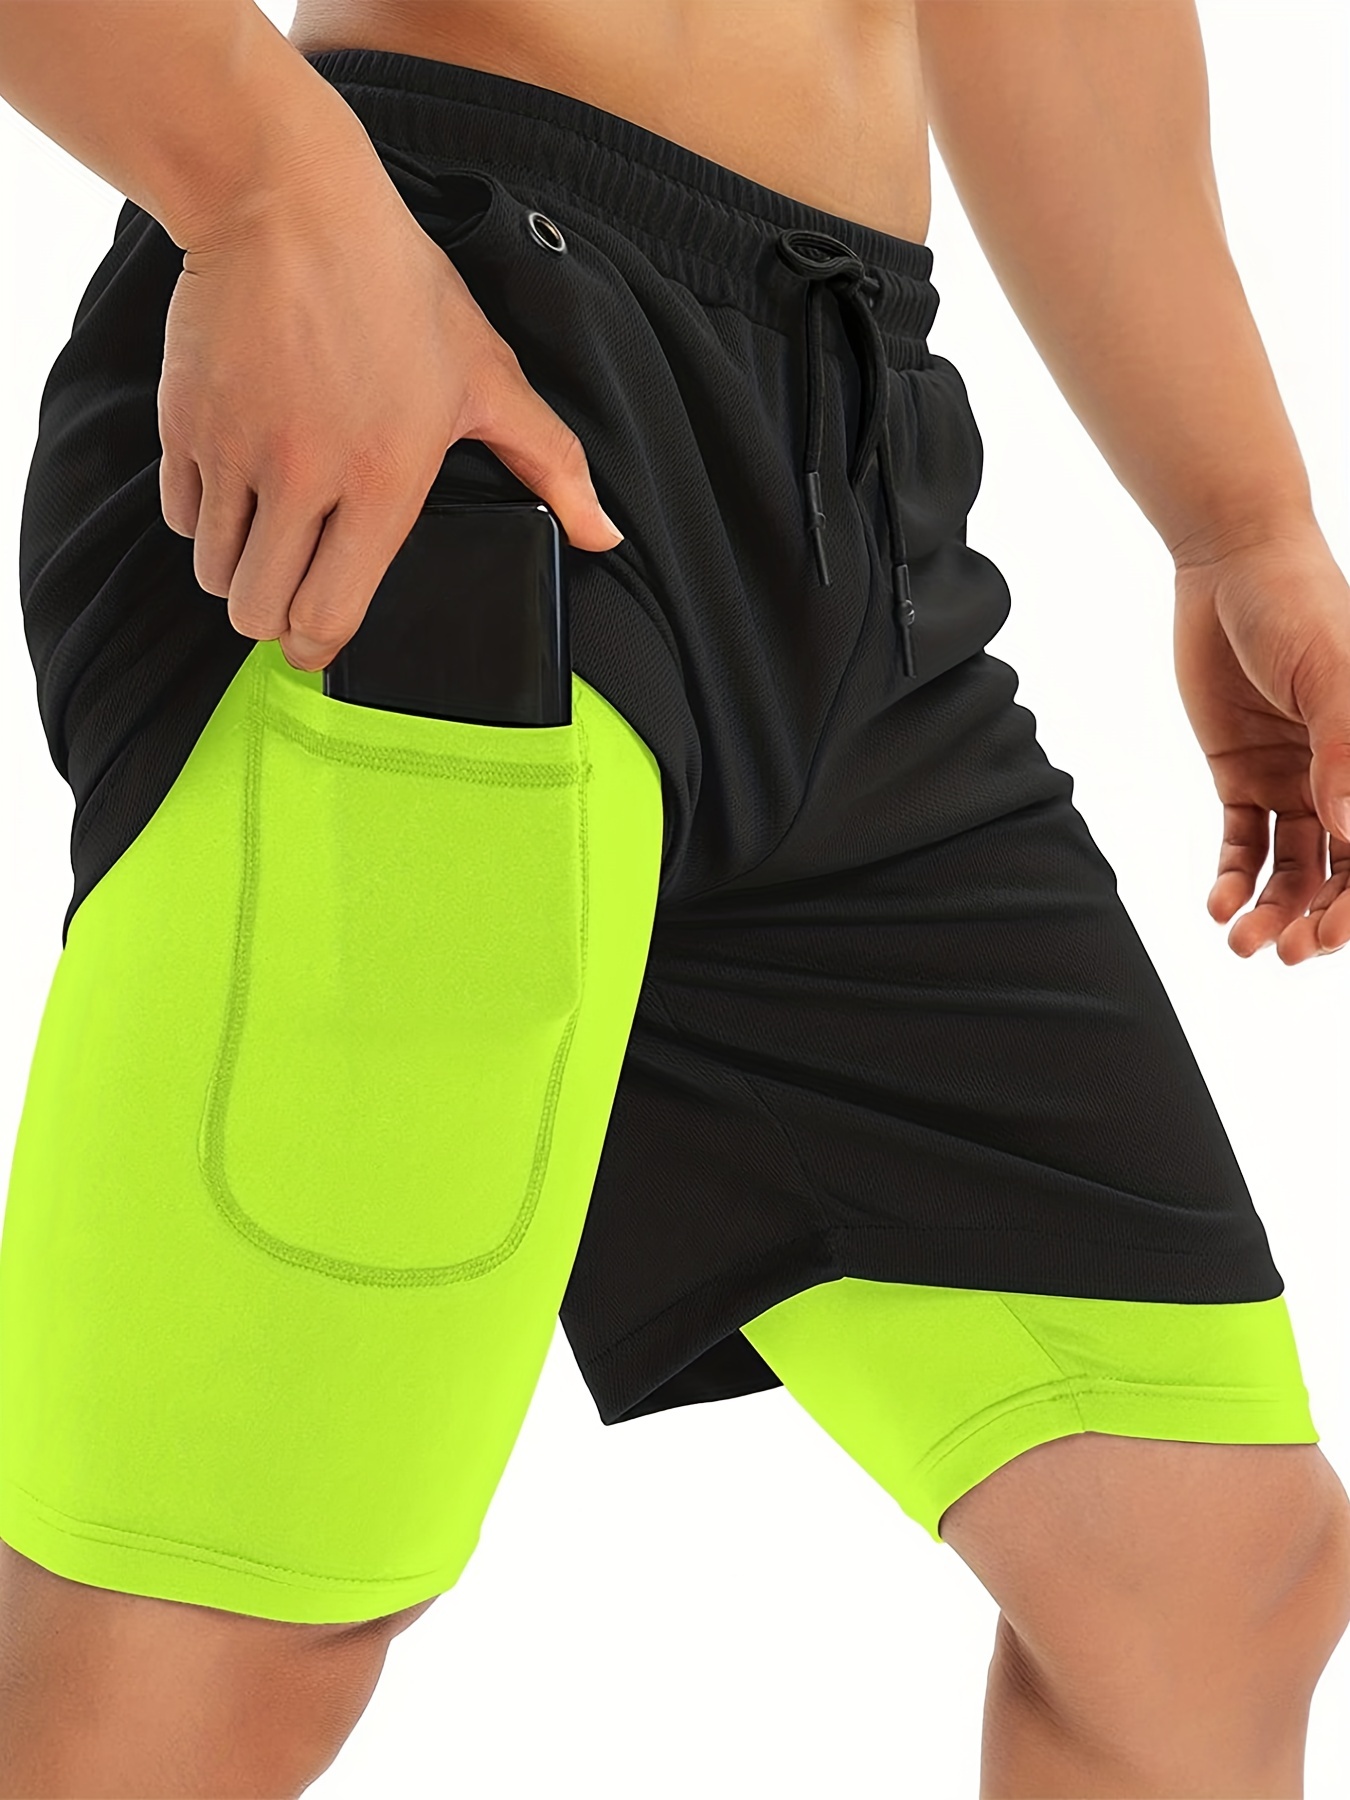 Mens Gym Running Shorts Athletic Workout Clothes For Men Quick-Dry Shorts  With Zipper Pockets